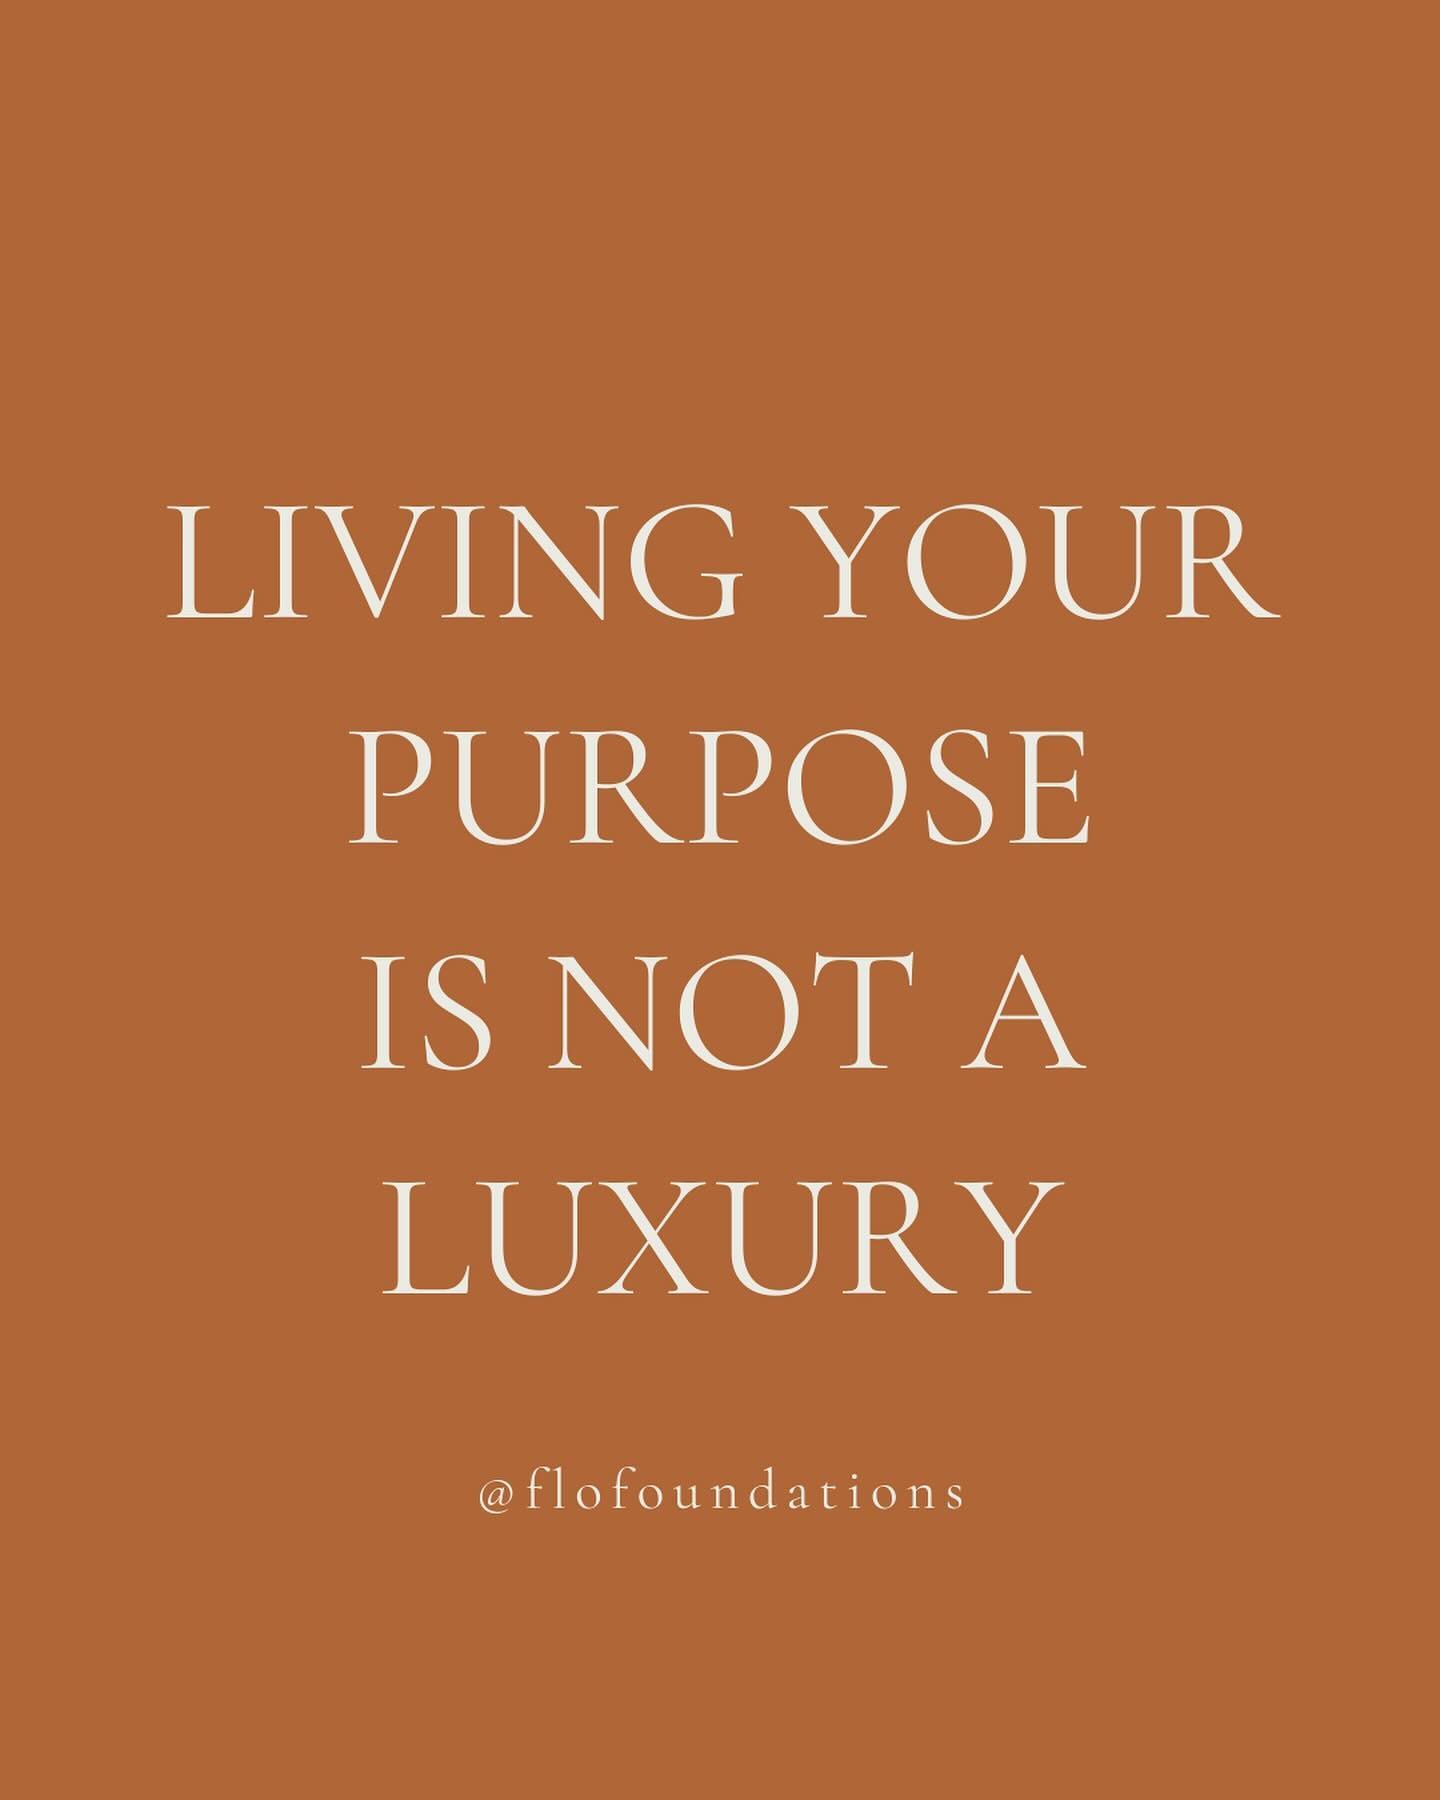 Only you can live your purpose✨

It might not be easier, and there may be barriers along your path. 

But only you can live your purpose. And the world needs your purpose. 

#purposedriven #findyourpurpose #findyourspark #purposecoach #purposecoachin